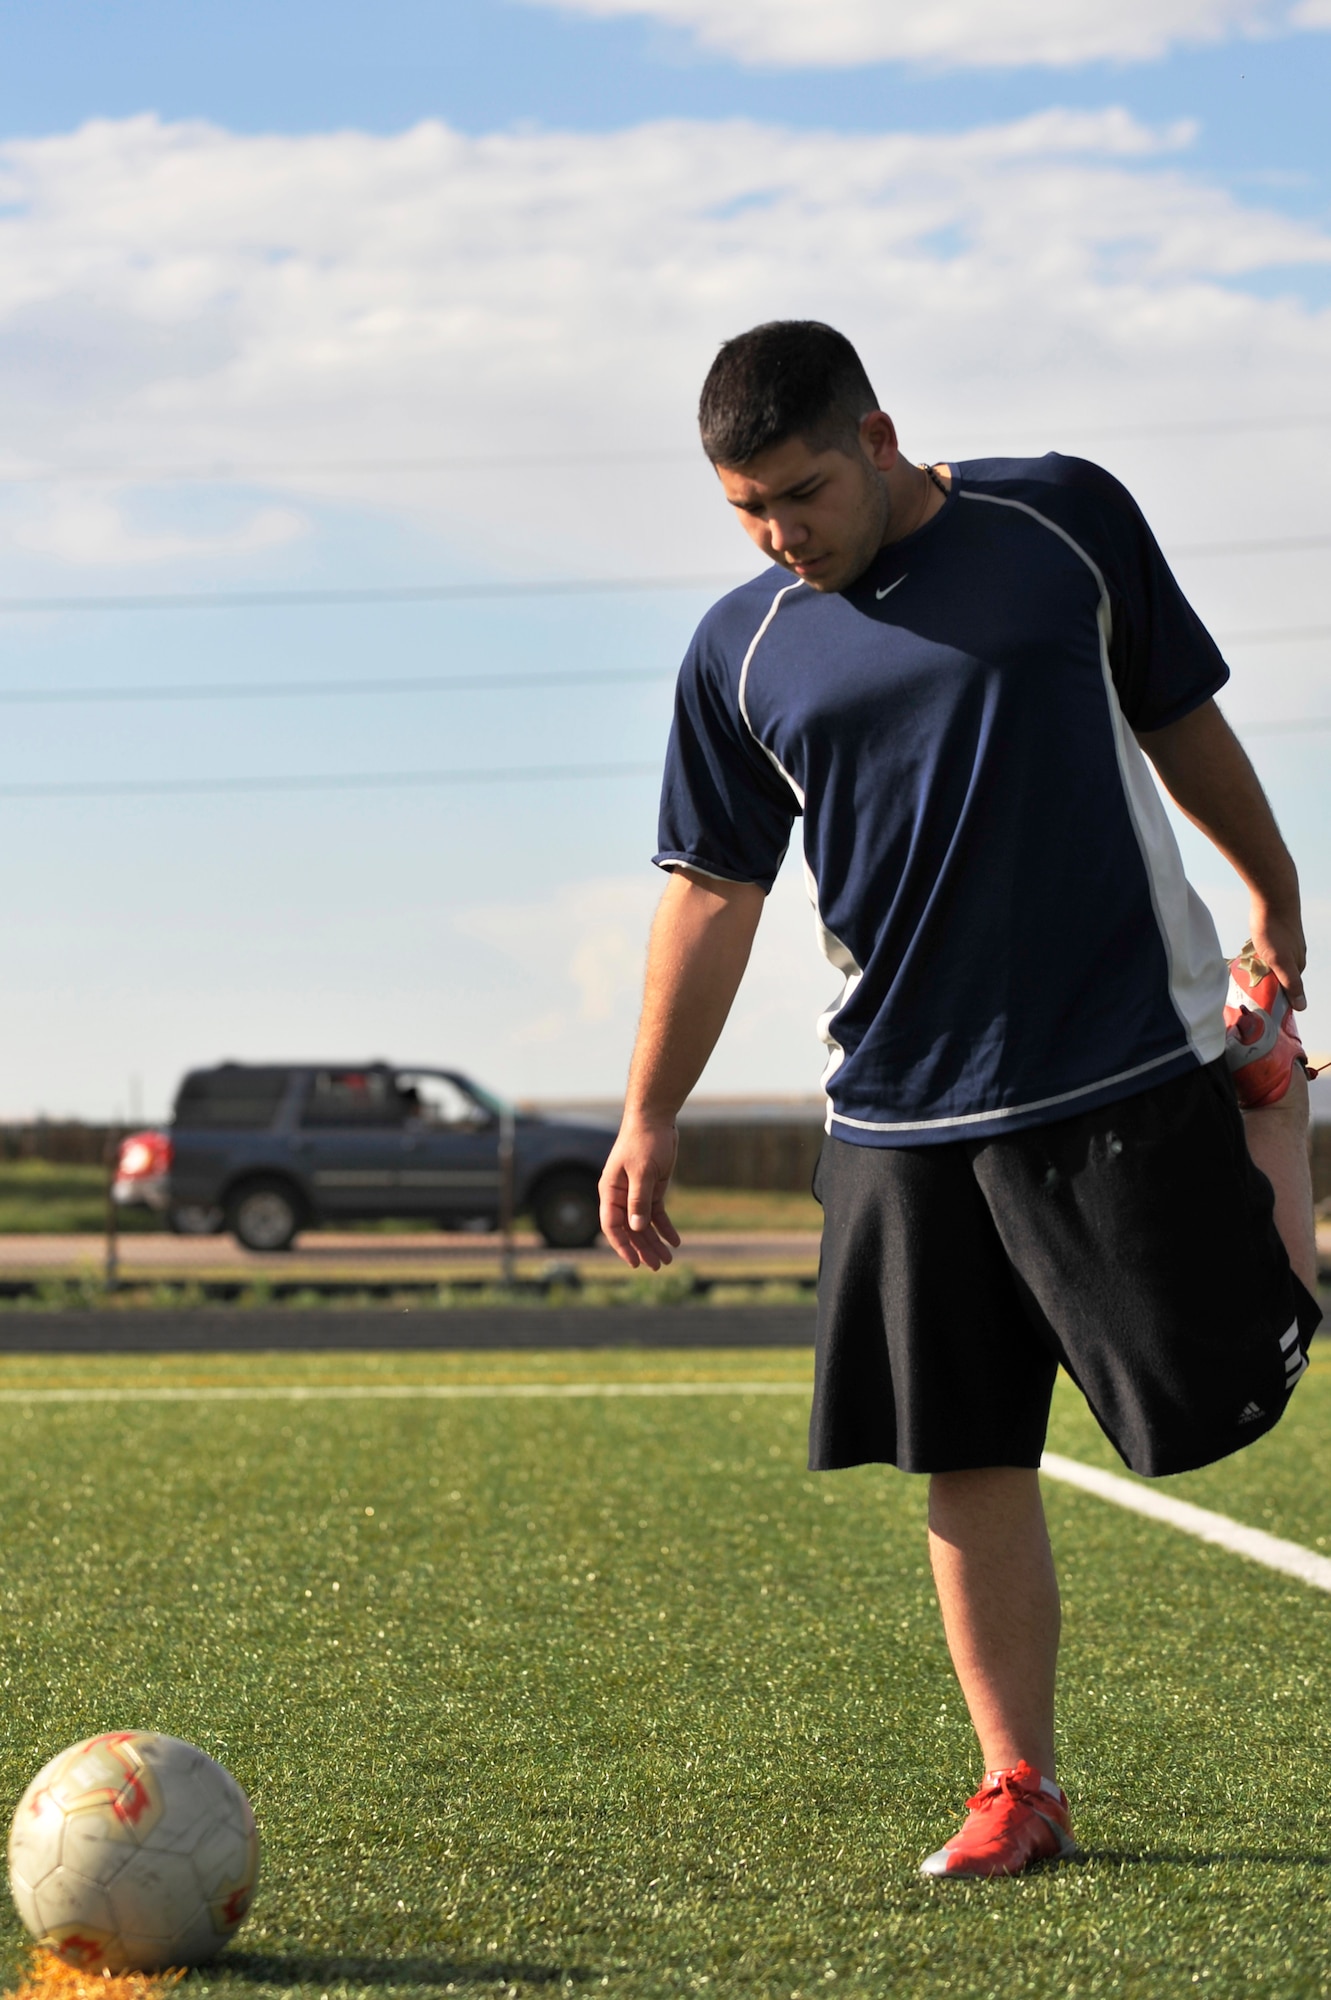 BUCKLEY AIR FORCE BASE, Colo. -- Airman 1st Class Nolan Luna-Chavez,460th Space Communication Squadron, stretches before doing a few practice drills. Airman Luna-Chavez has been playing soccer since the 7th grade. (U.S. Air Force photo by Airman 1st Class Paul Labbe)